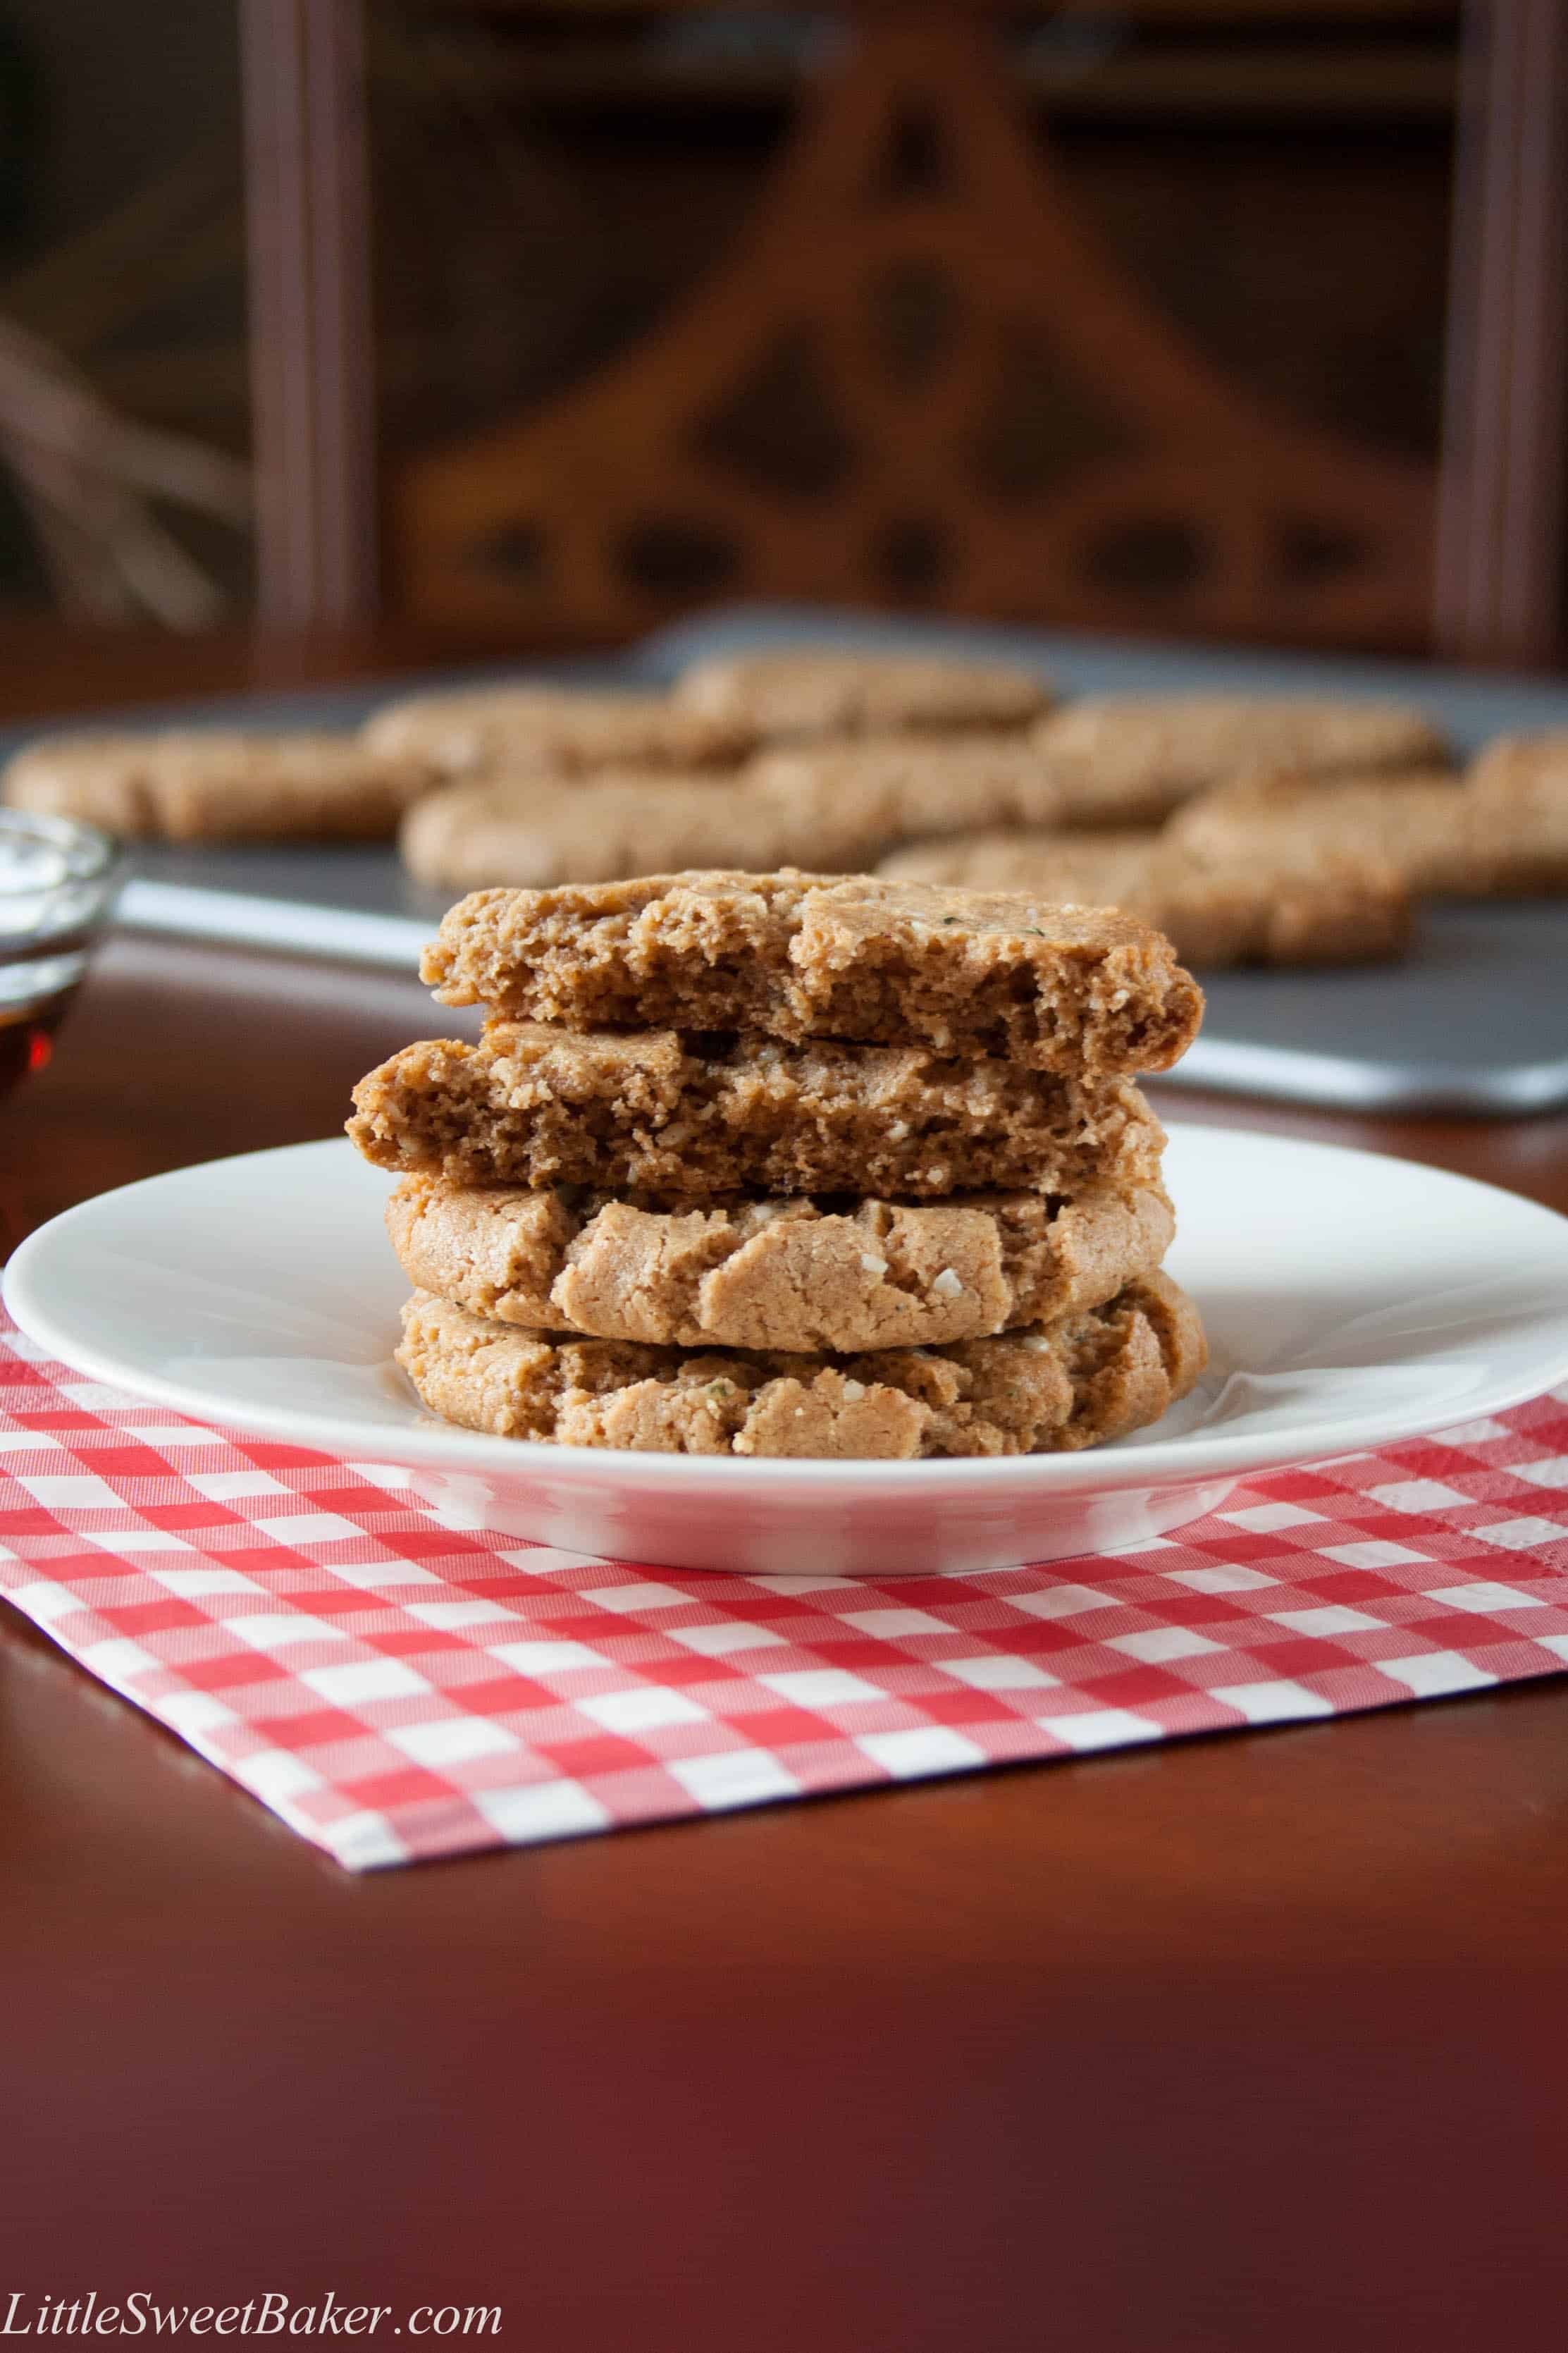 GLUTEN-FREE SPICED CASHEW BUTTER COOKIES. These chewy cookies are healthy and easy to make. If you like ginger molasses cookies, then this recipe was made for you.